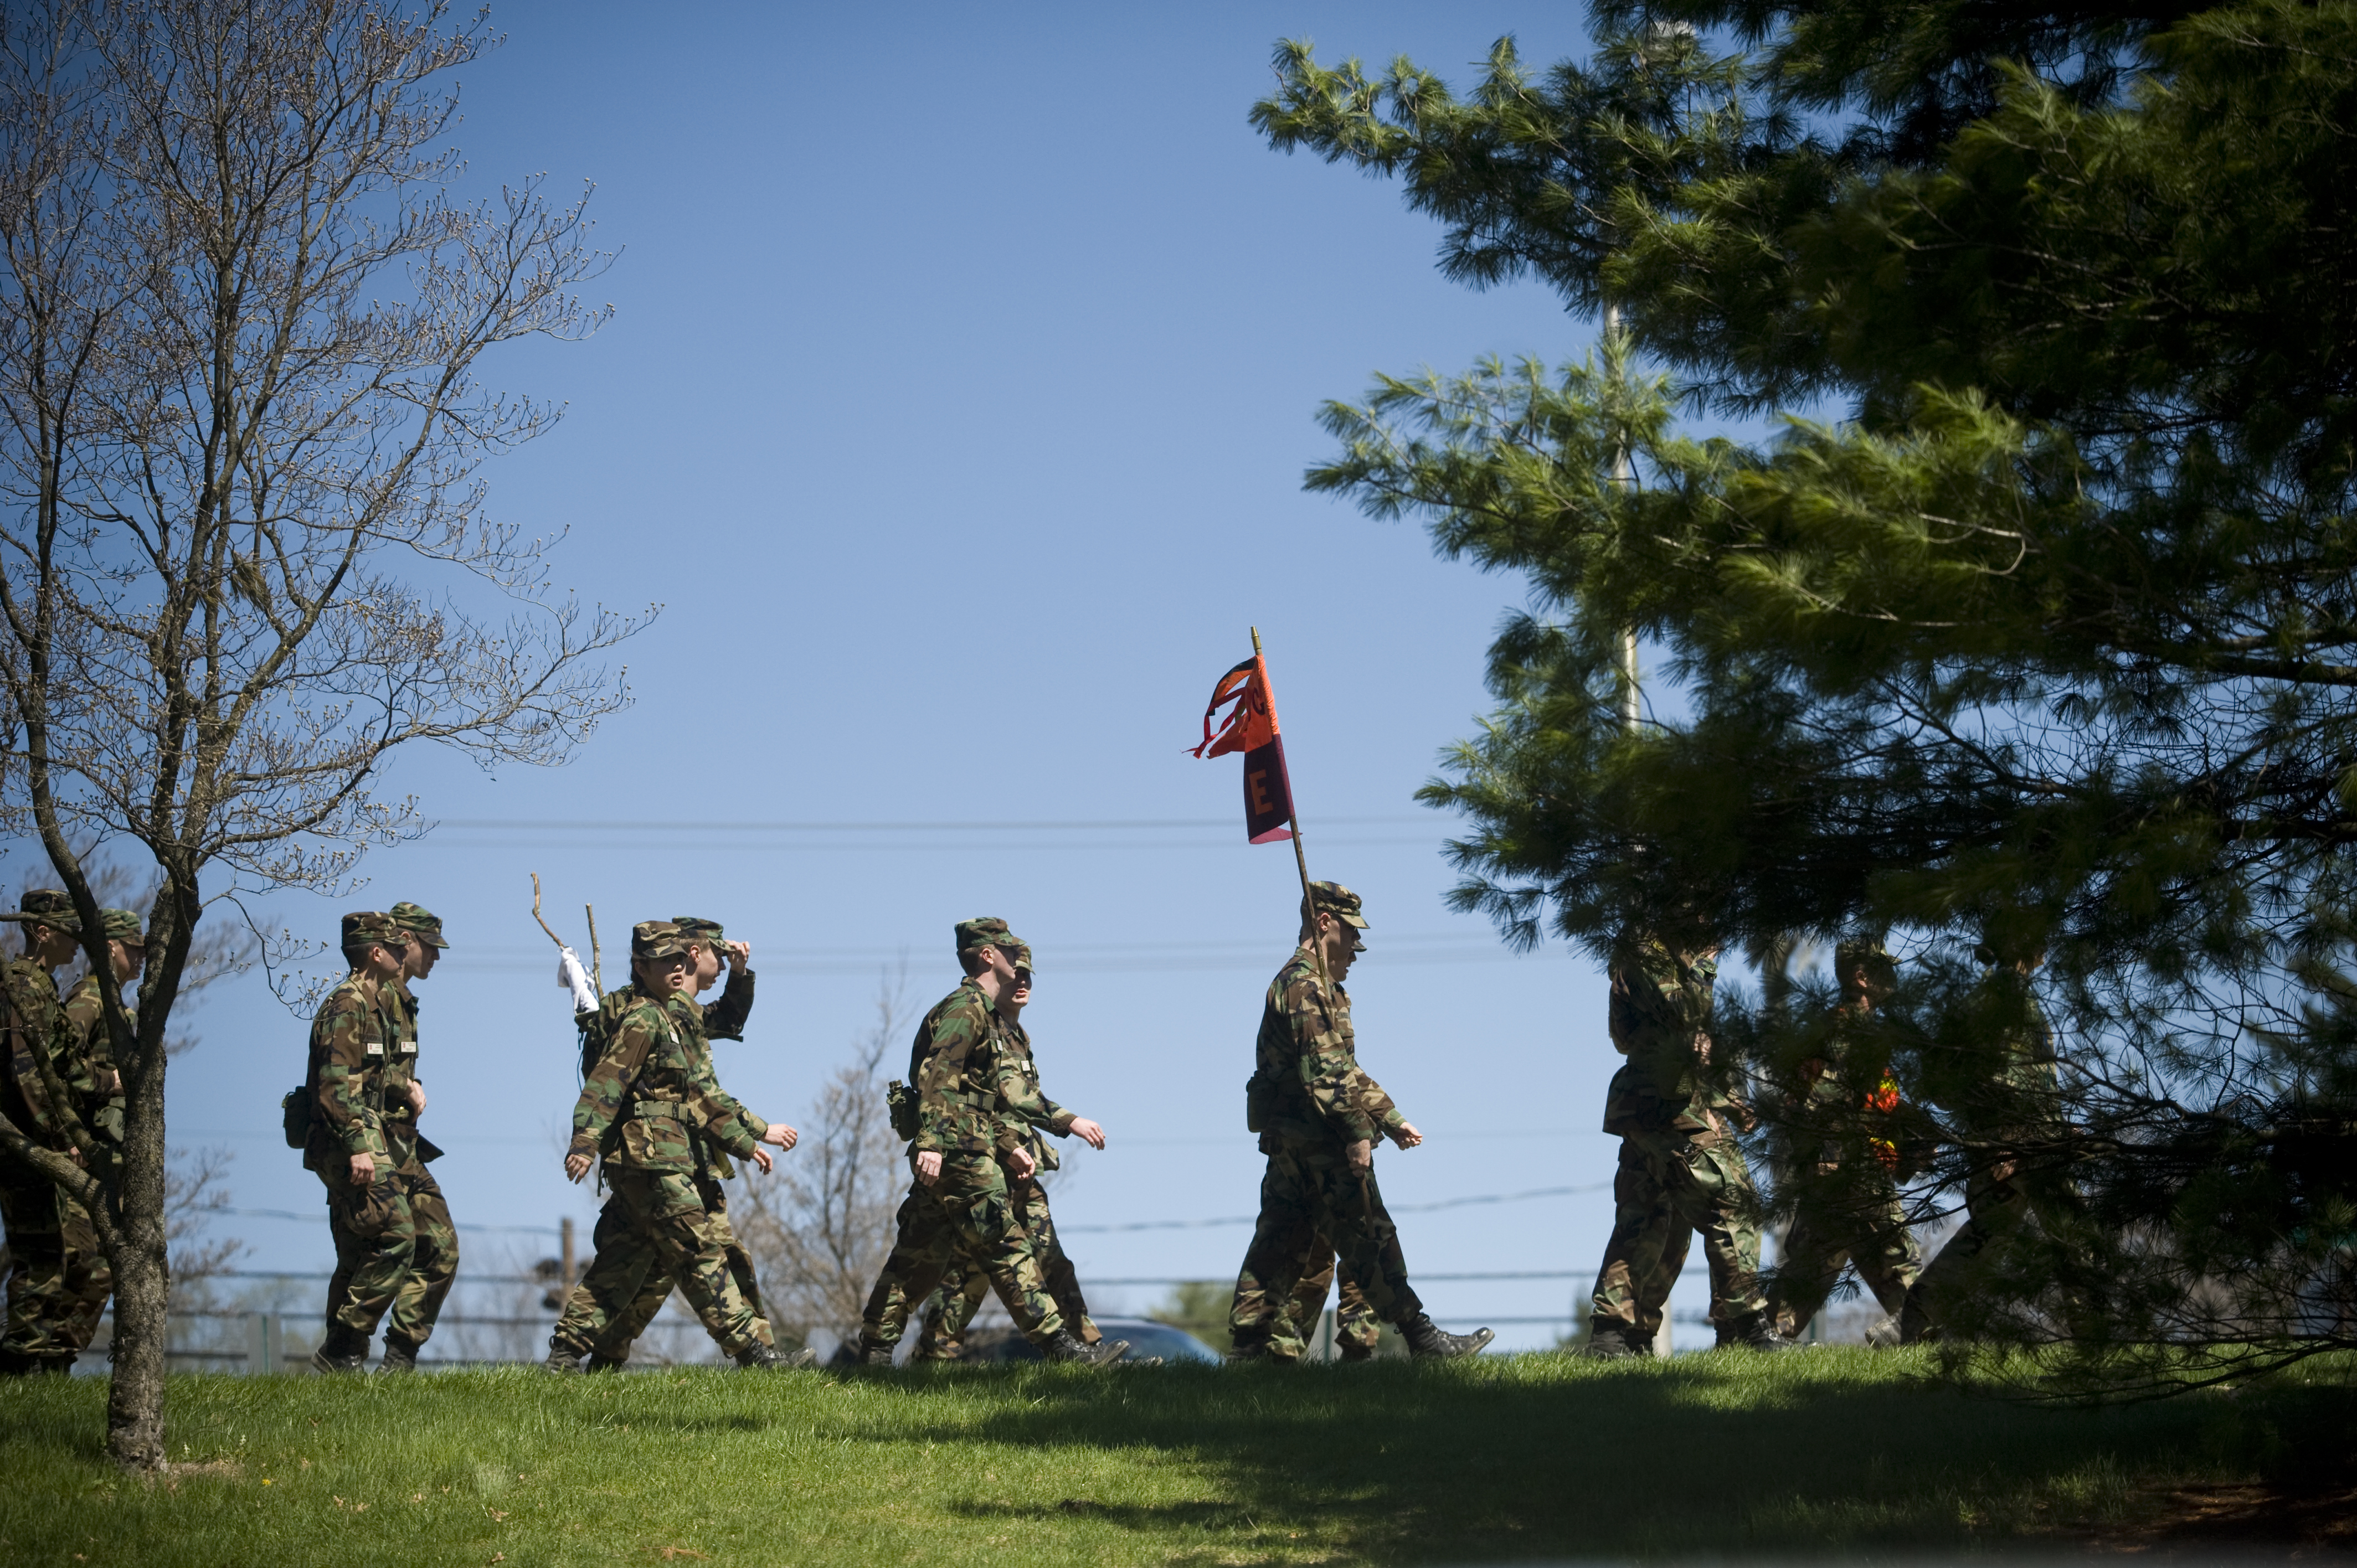 Corps members carry a flag and march in formation